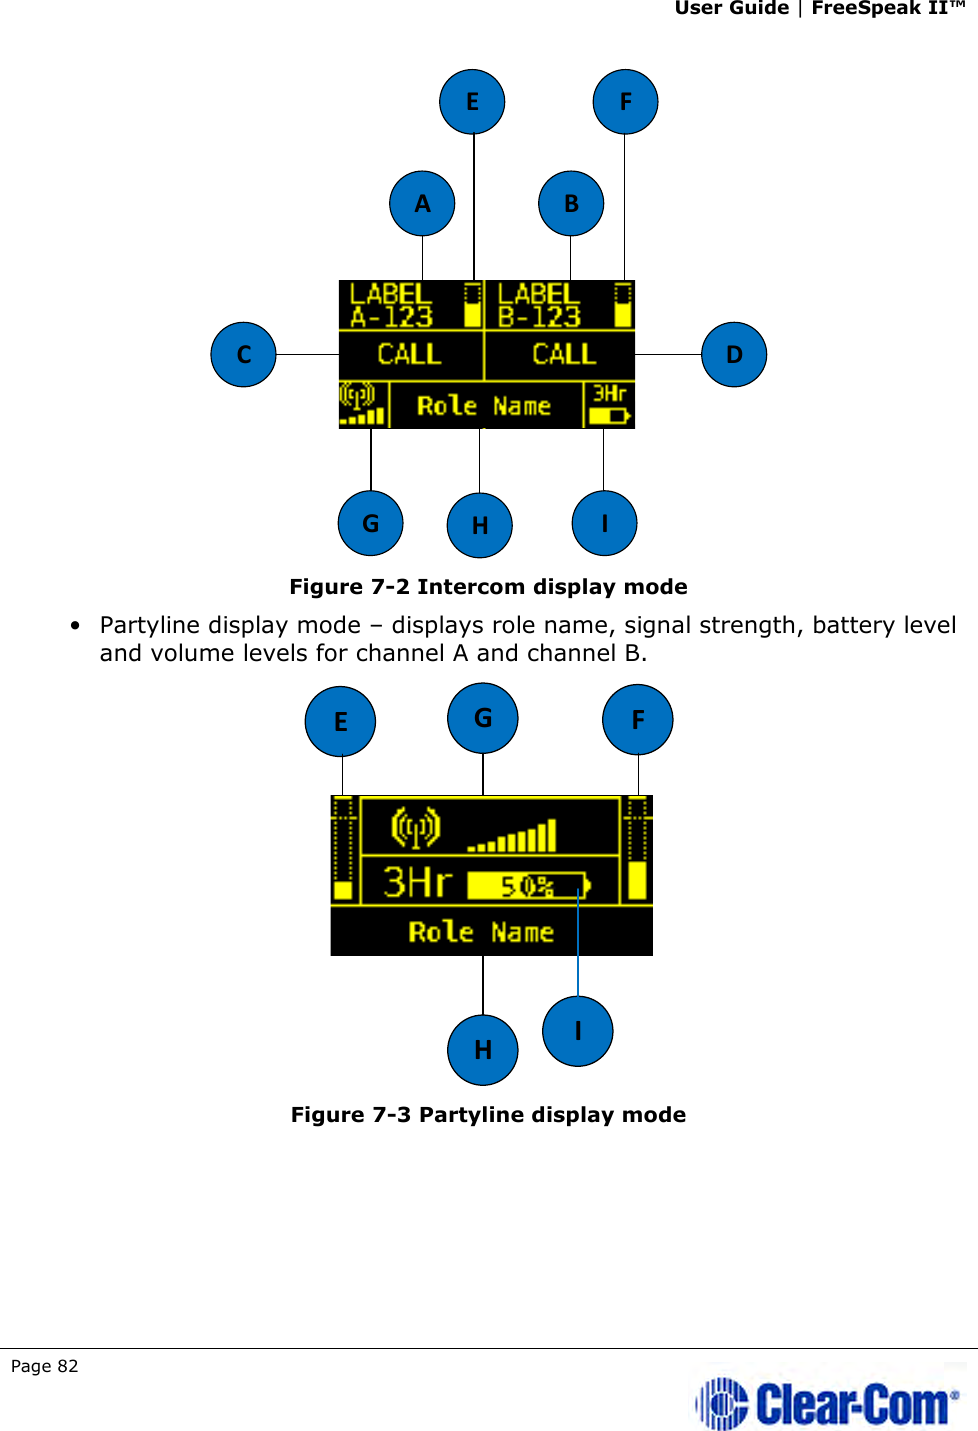 User Guide | FreeSpeak II™  Page 82    Figure 7-2 Intercom display mode • Partyline display mode – displays role name, signal strength, battery level and volume levels for channel A and channel B.  Figure 7-3 Partyline display mode      A BDCGHIE FHIGEF